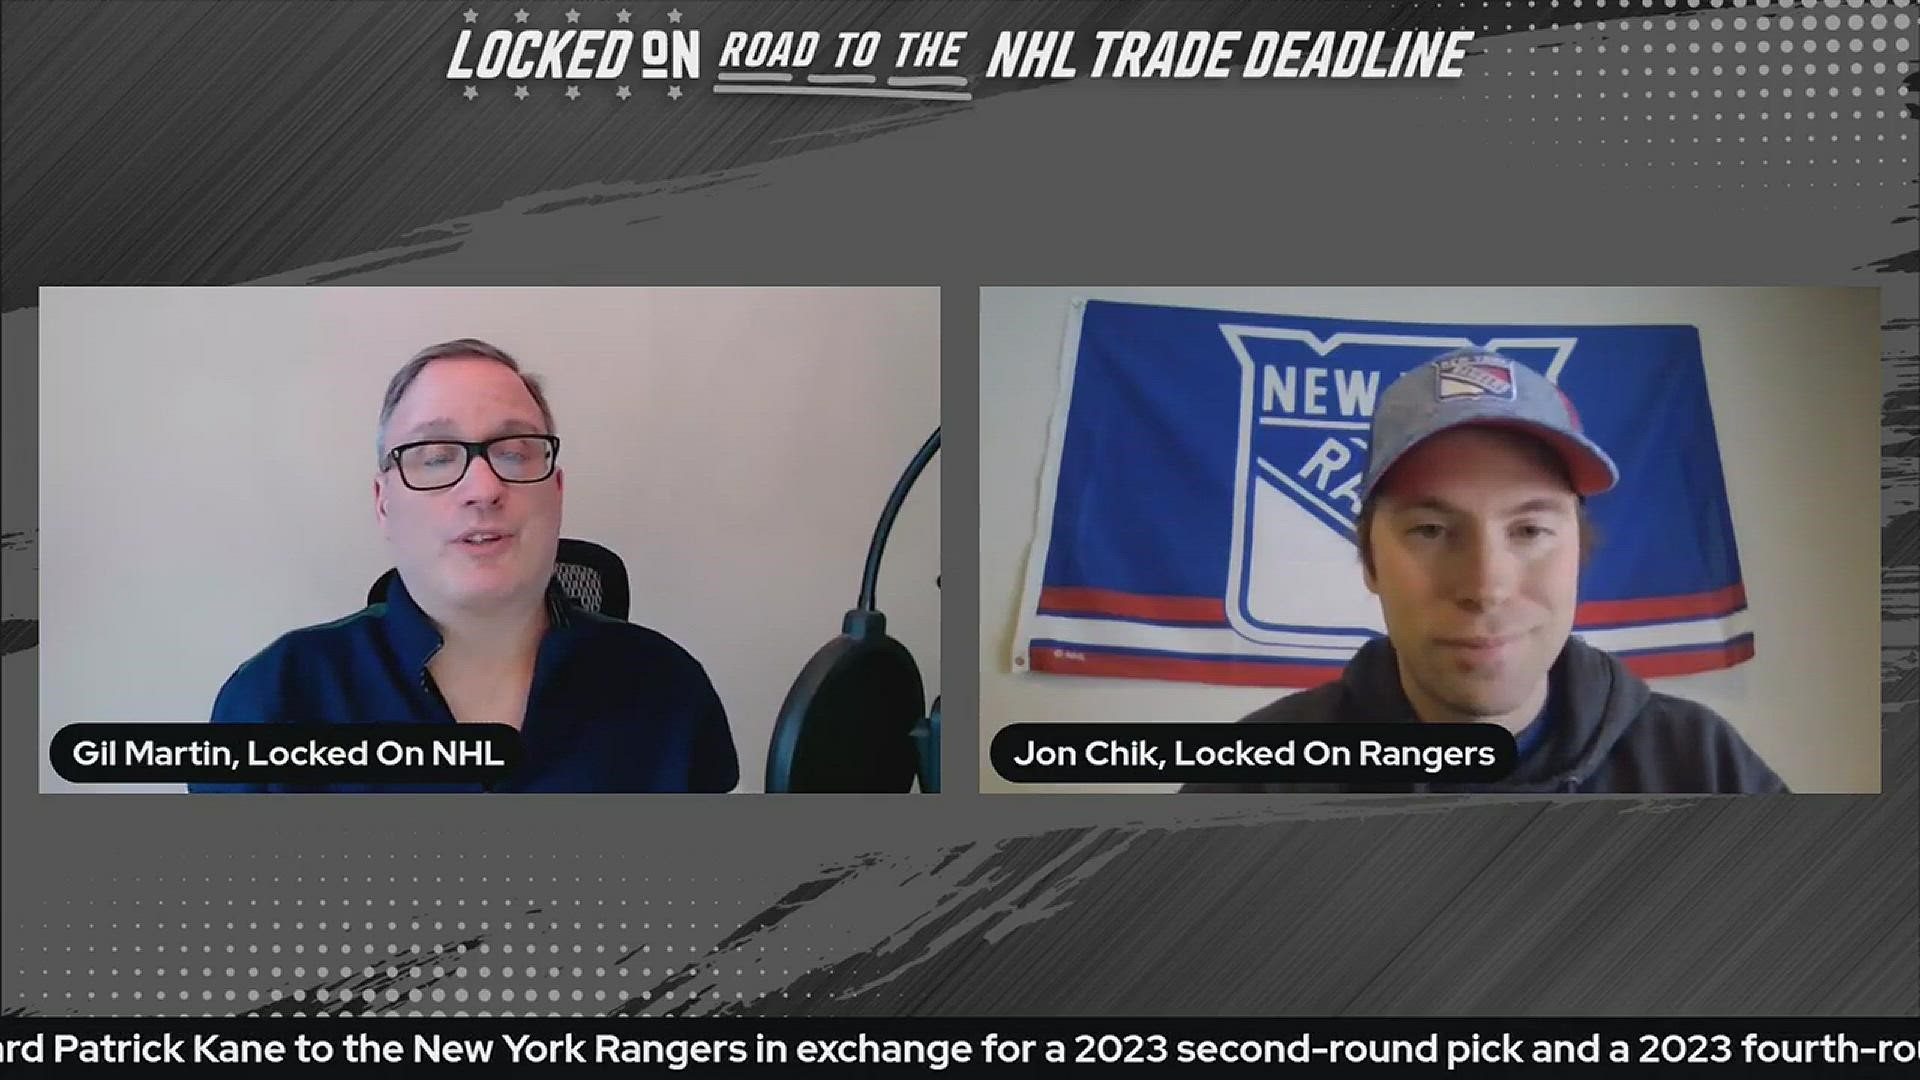 Jon Chik of Locked On Rangers joins Gil Martin of Locked On NHL to react to the New York Rangers landing Patrick Kane in a trade from the Chicago Blackhawks.